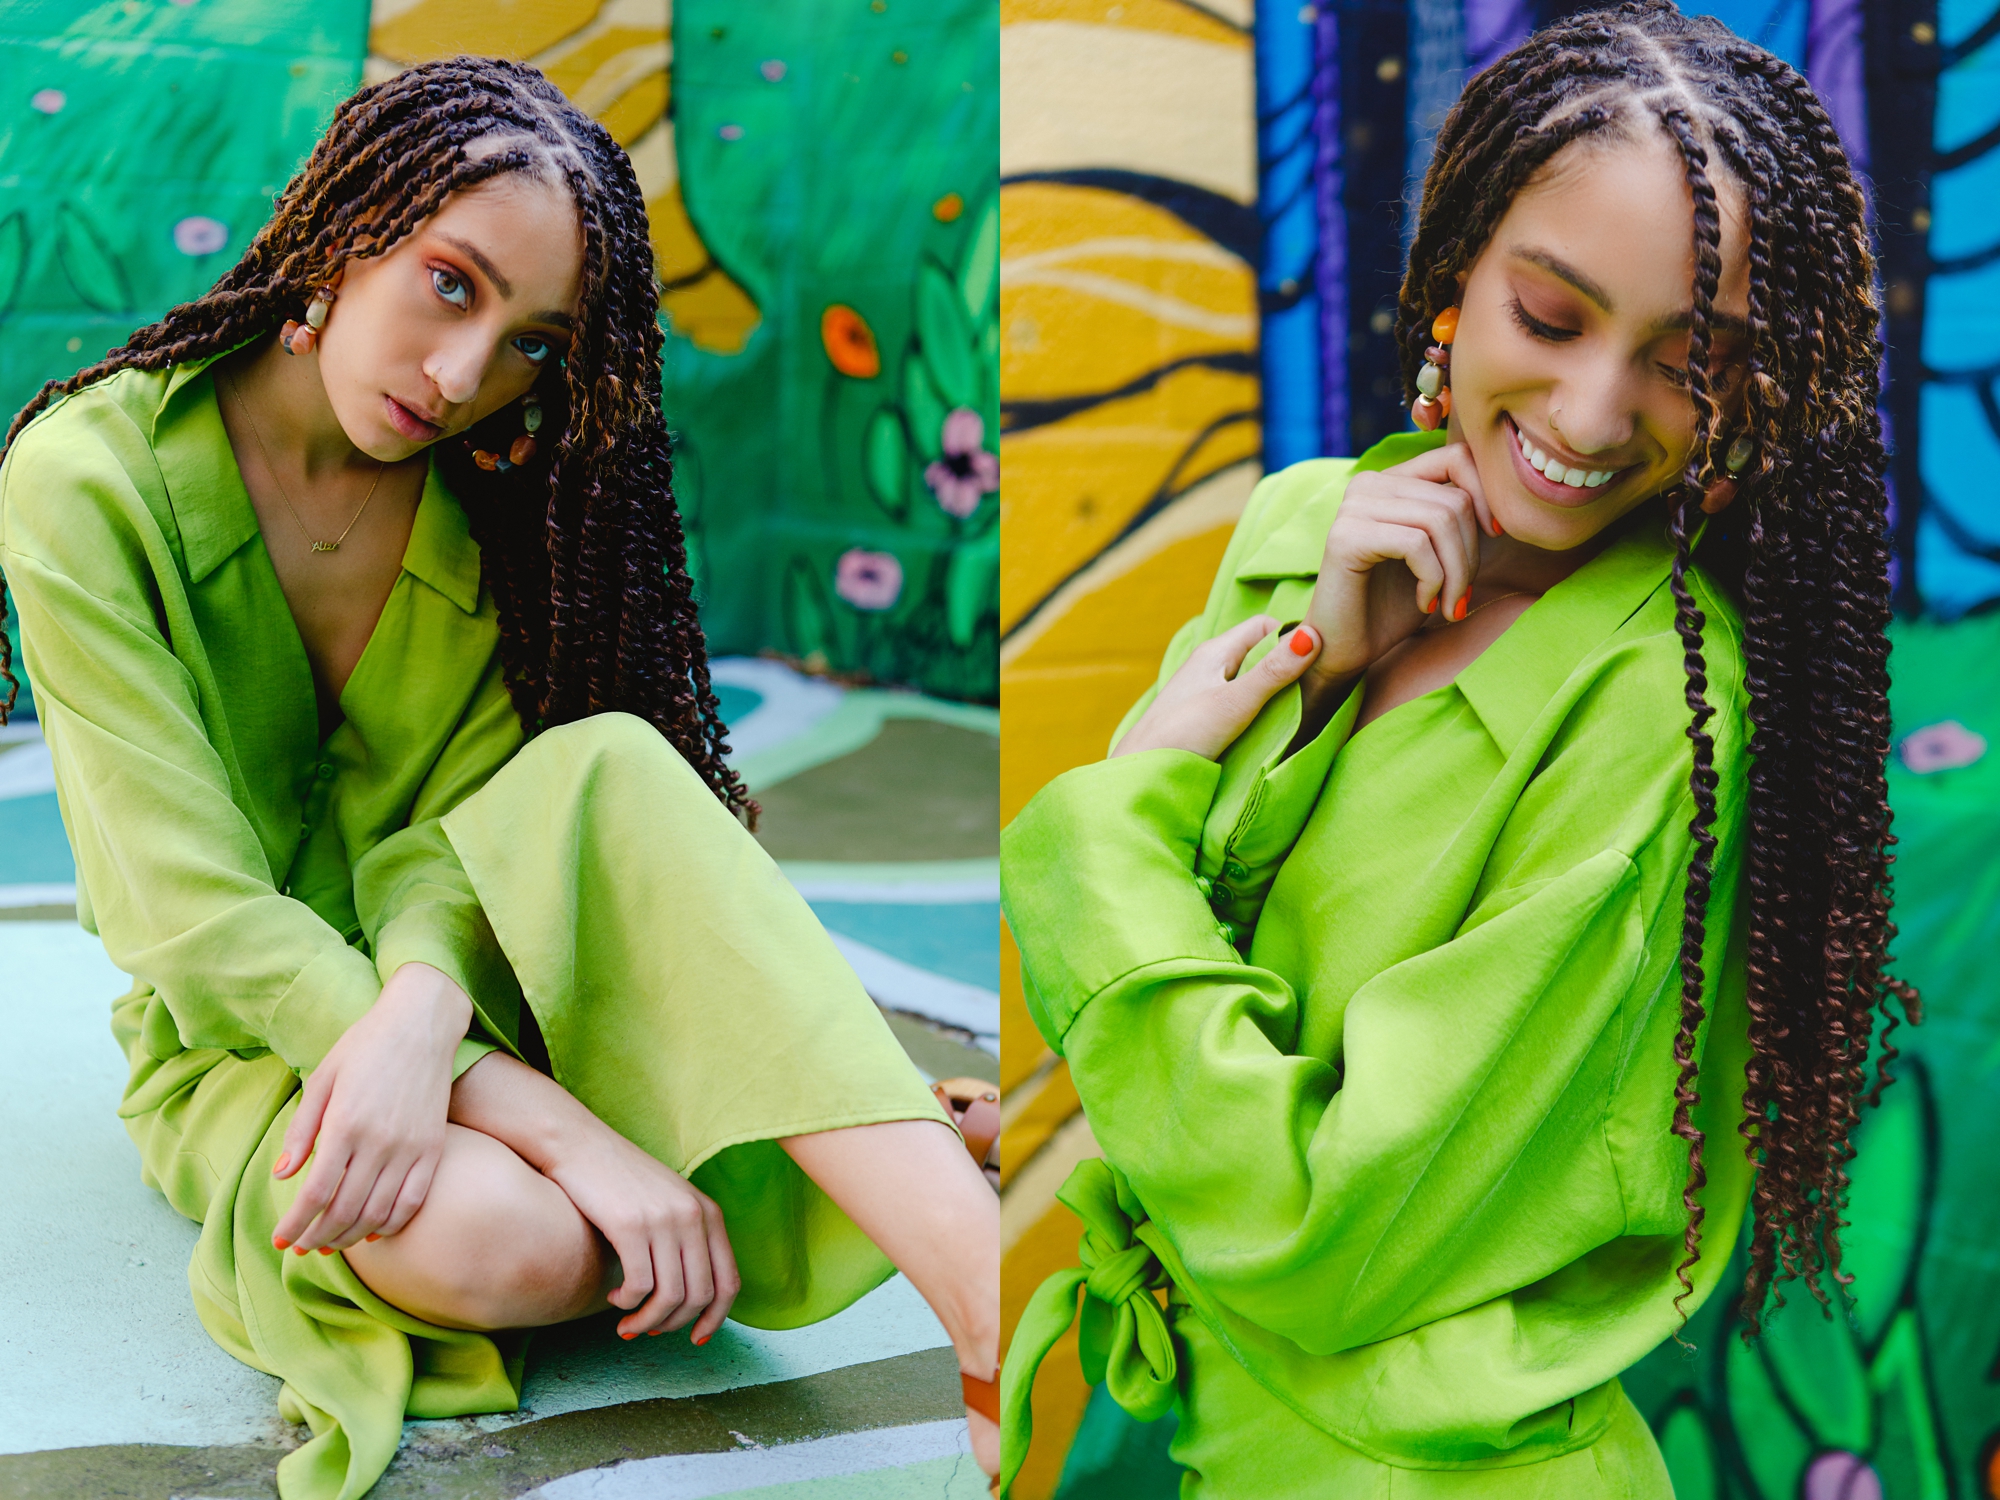 Alize poses in two images wearing a lime green long sleeve midi dress. The first pose is sitting on the ground and the second is glancing down at her arm and smiling.